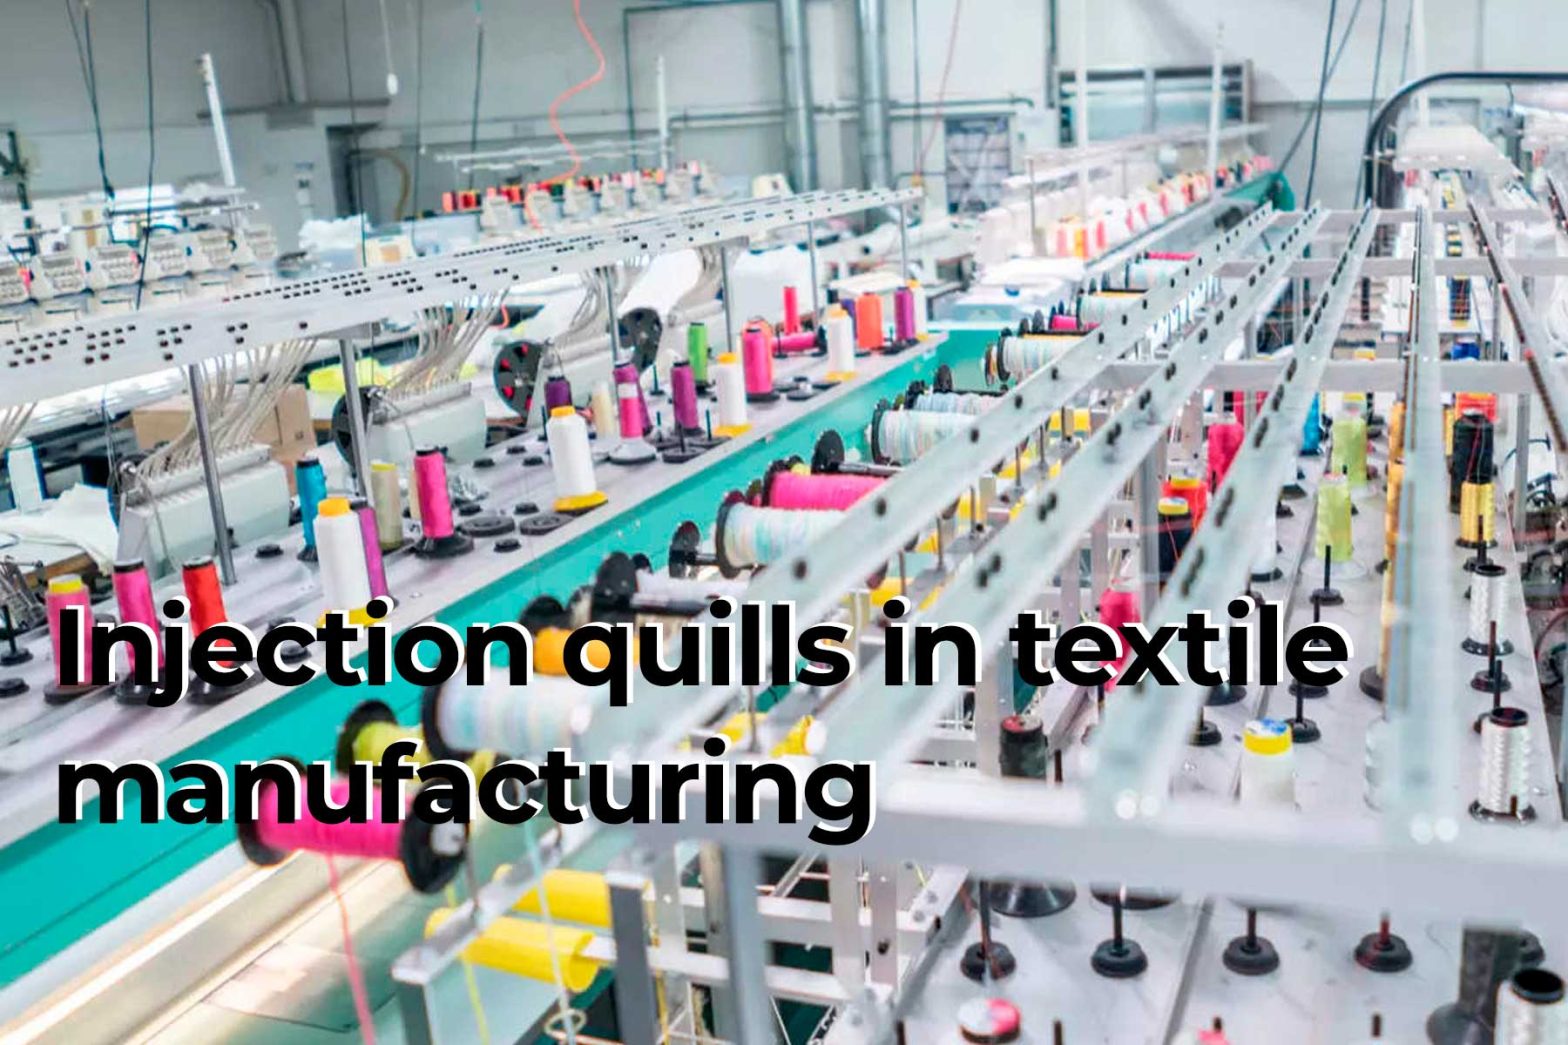 Purpose of injection quills from India in textile manufacturing